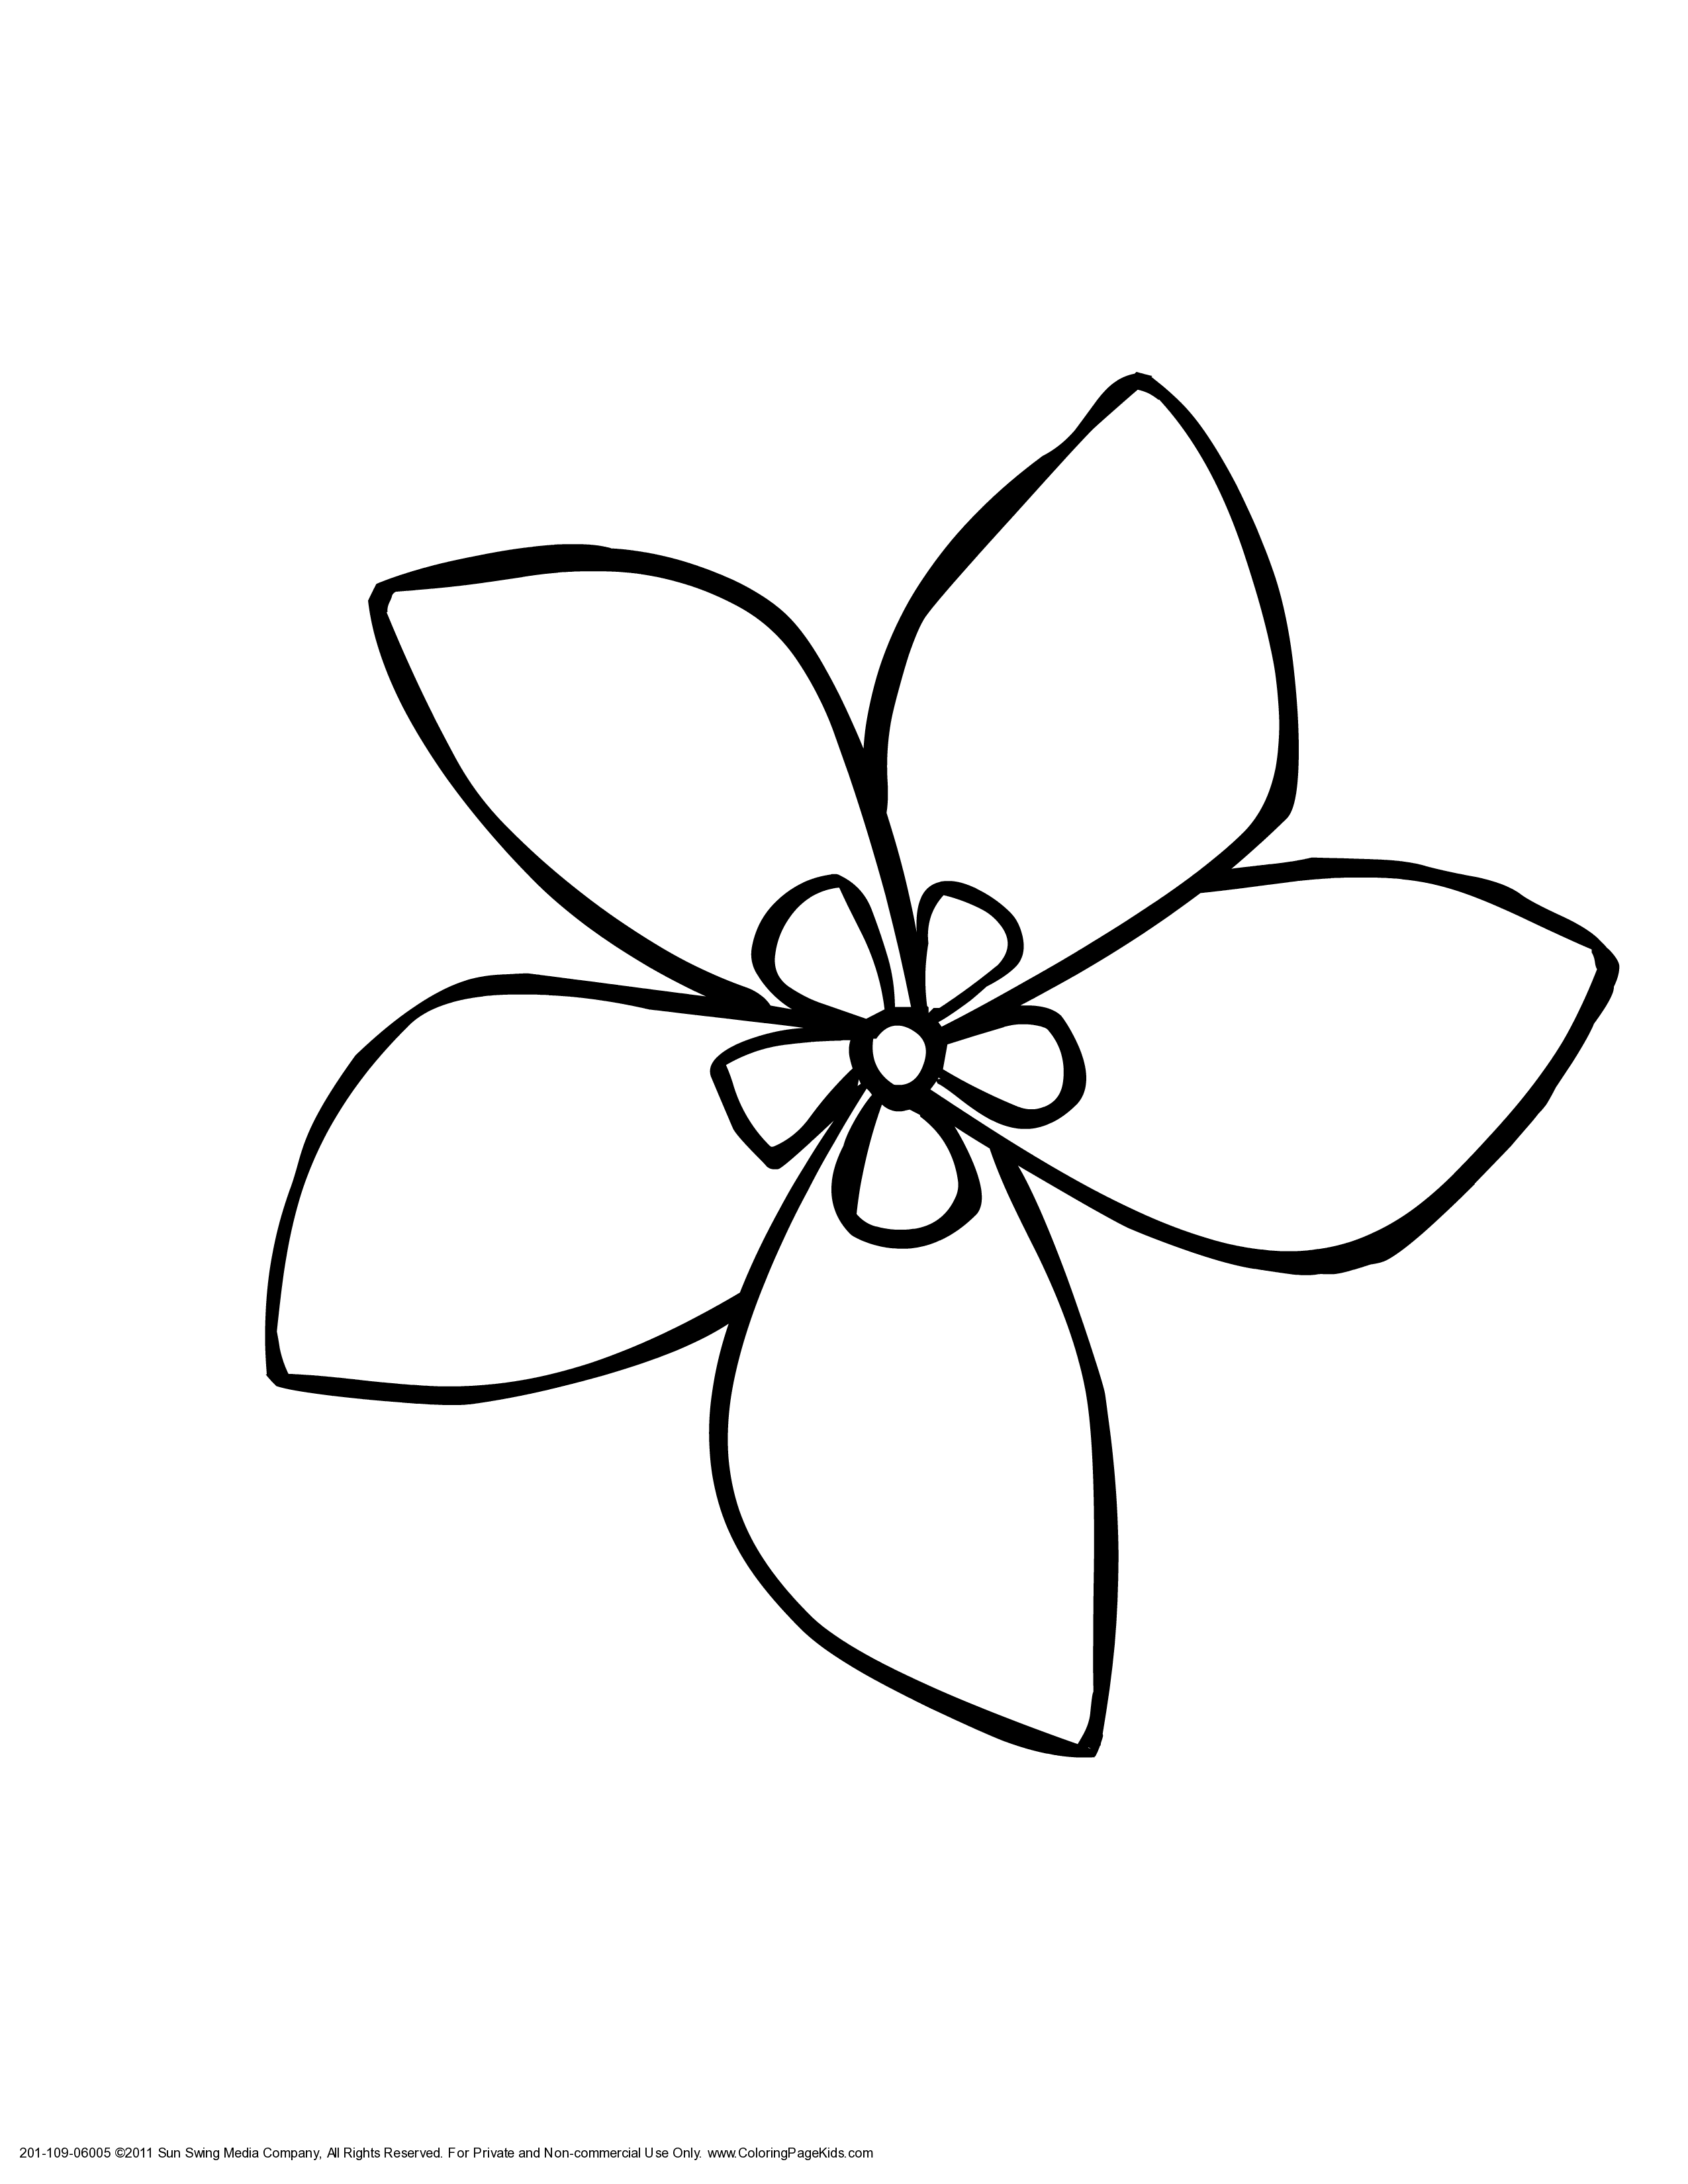 Indian Jasmine Flower Coloring Page